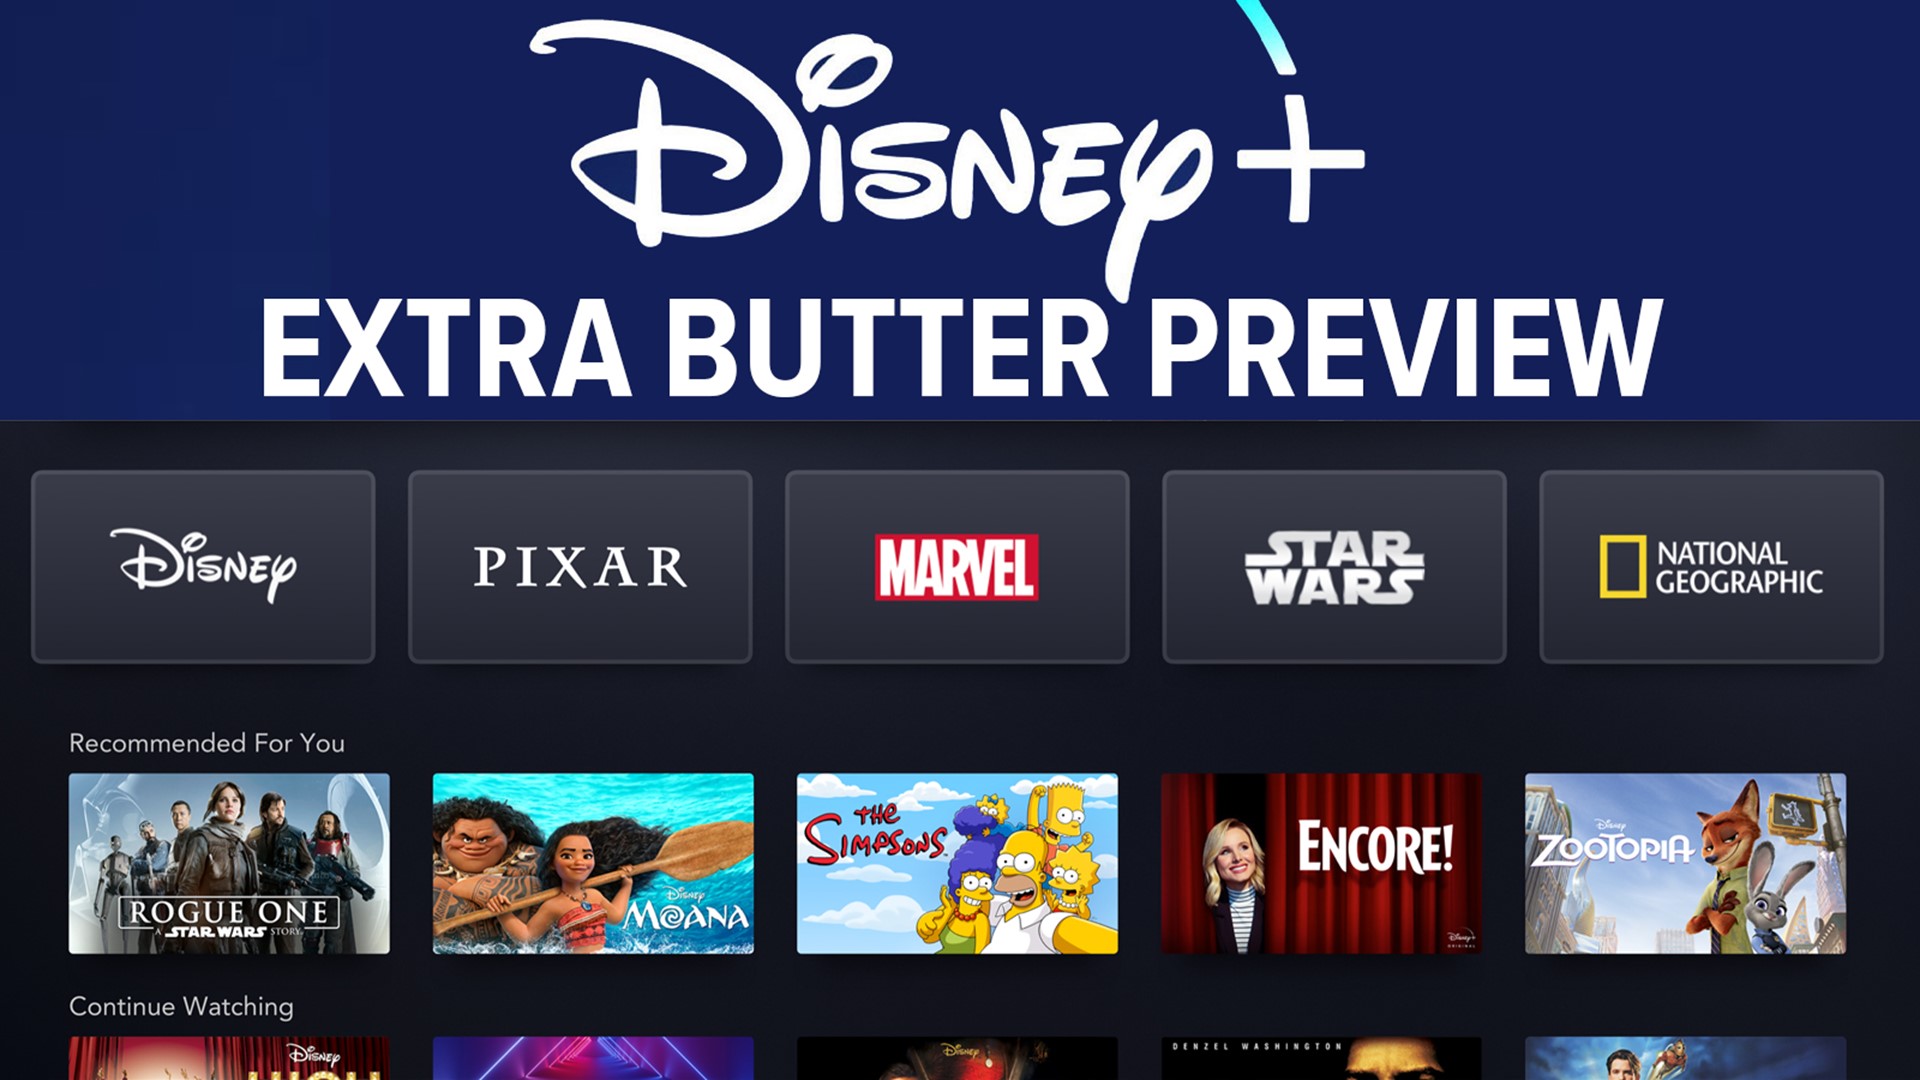 Mark S. Allen of Extra Butter previews the new Disney Plus streaming service with a look at the movies and shows we are looking forward to watching.